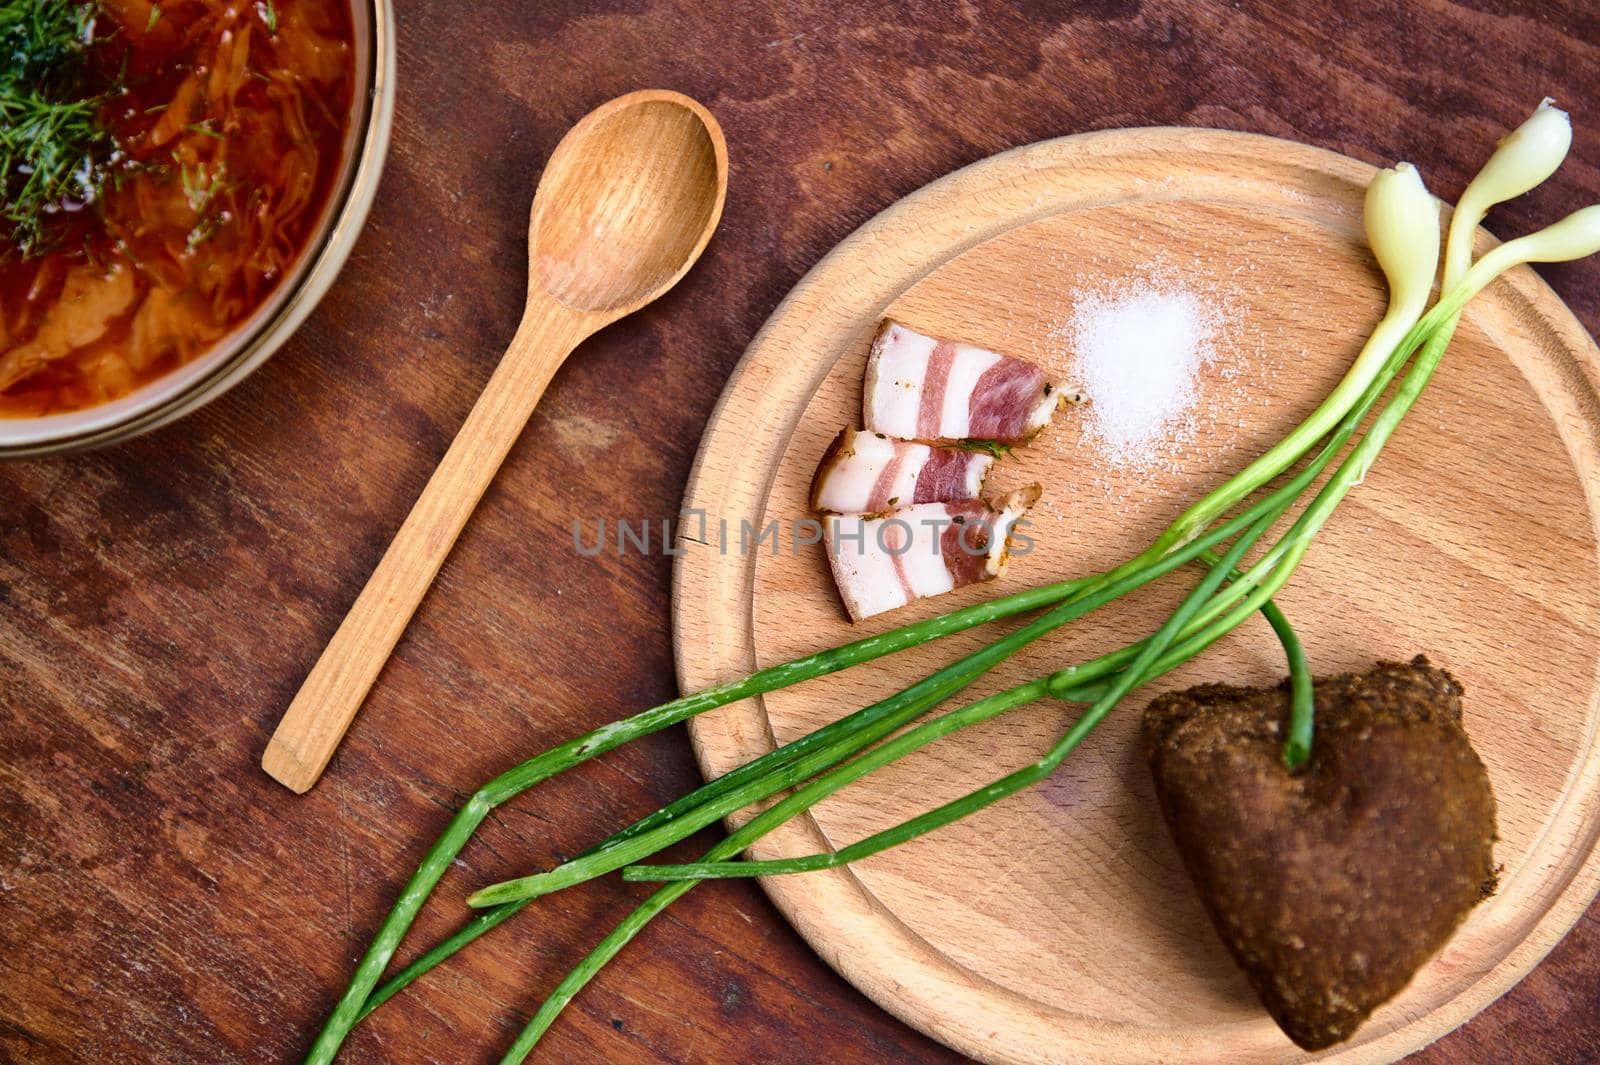 Top view of a wooden cutting board with a sliced bacon, salt, bread and green onion near a soup spoon and partial view of a red beetroot soup- traditional Ukrainian dish- Borscht on a wooden surface